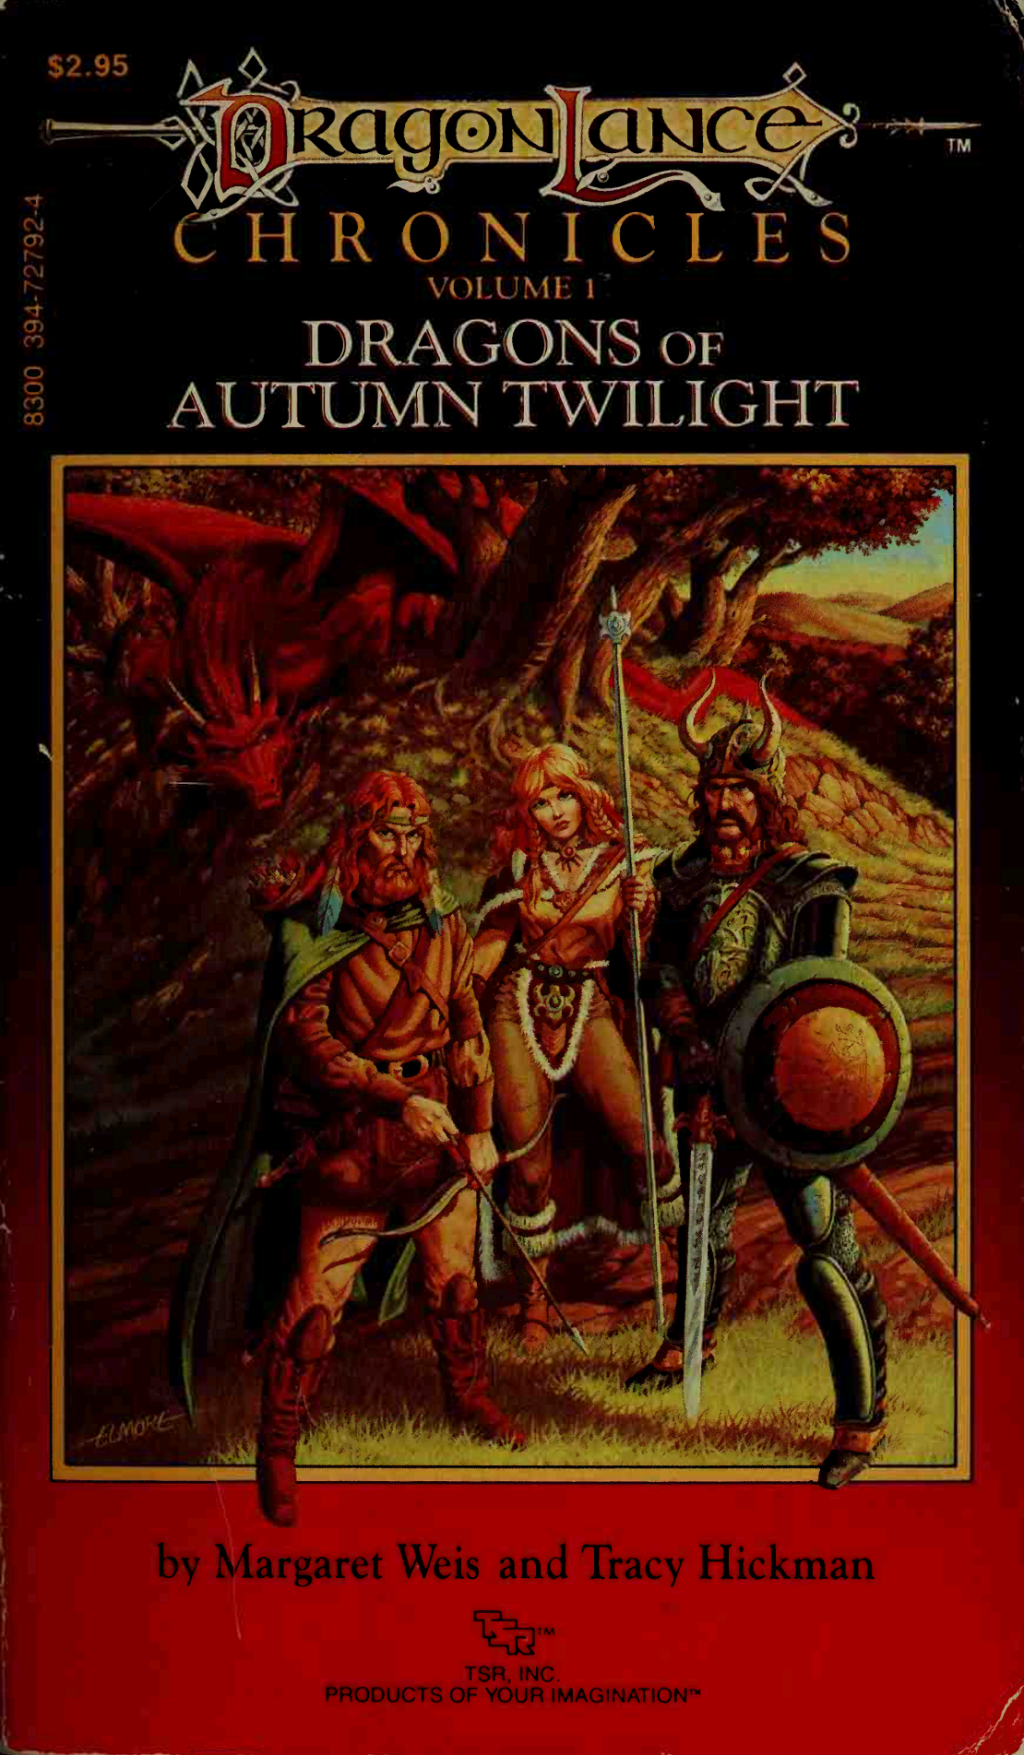 349. Margaret Weis and Tracy Hickman – Dragons of Autumn Twilight (1984)